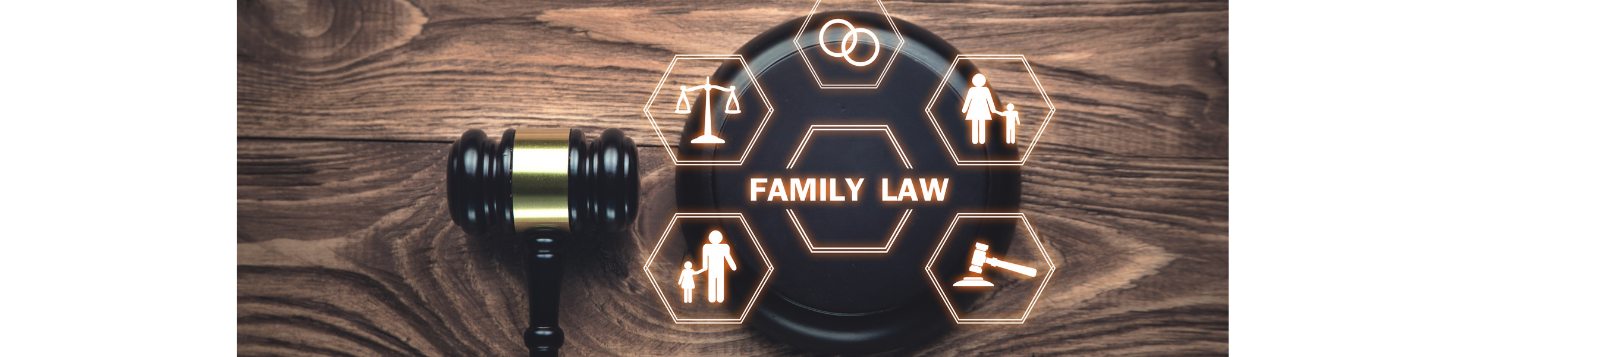 Family Law Firm in Vaughan - Legal Services by Lailna Dhaliwal LLP